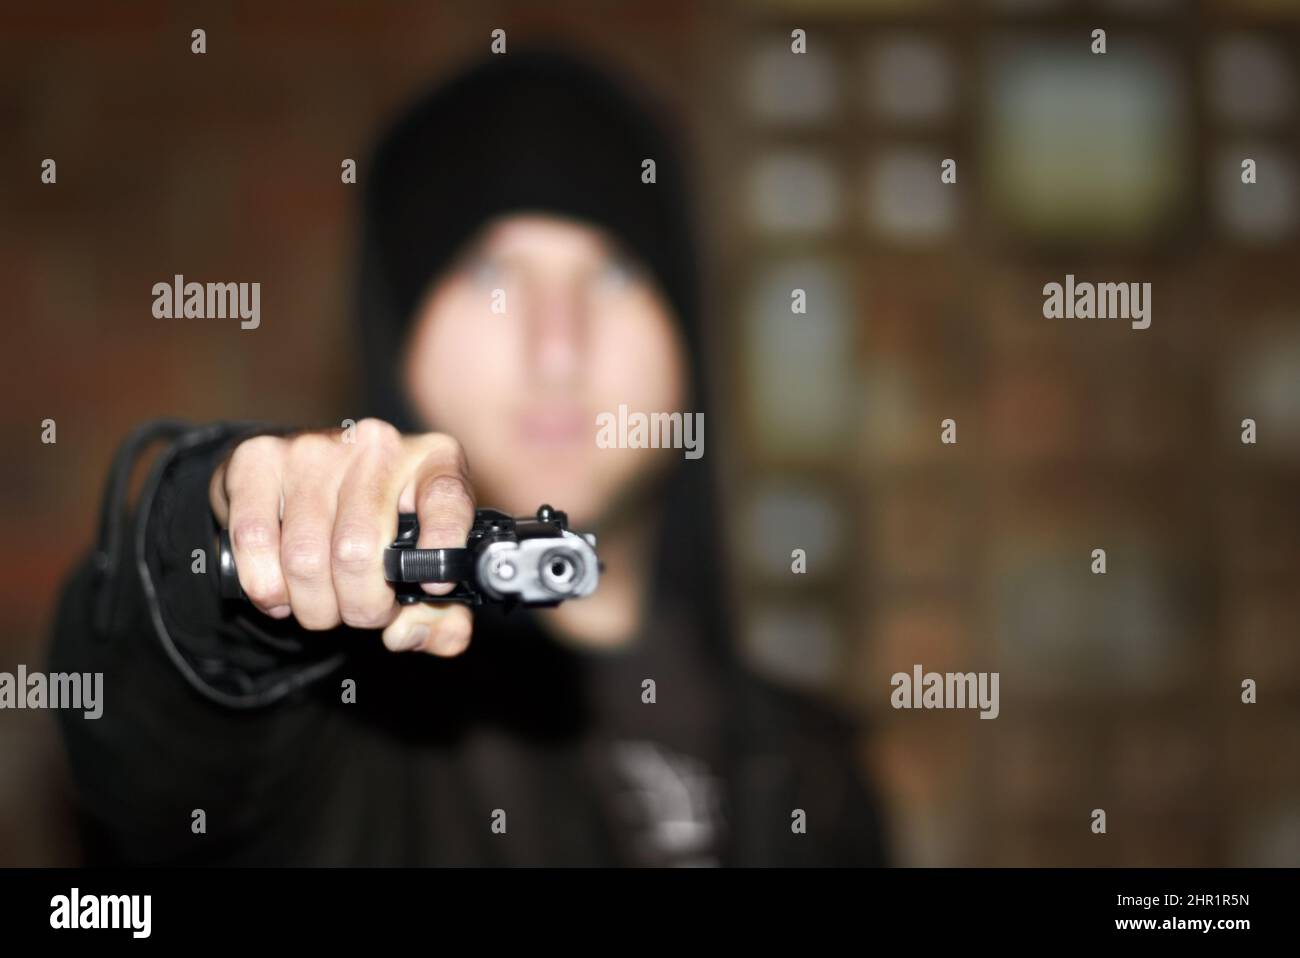 Criminal in control. View of a man holding a gun and pointing at you. Stock Photo